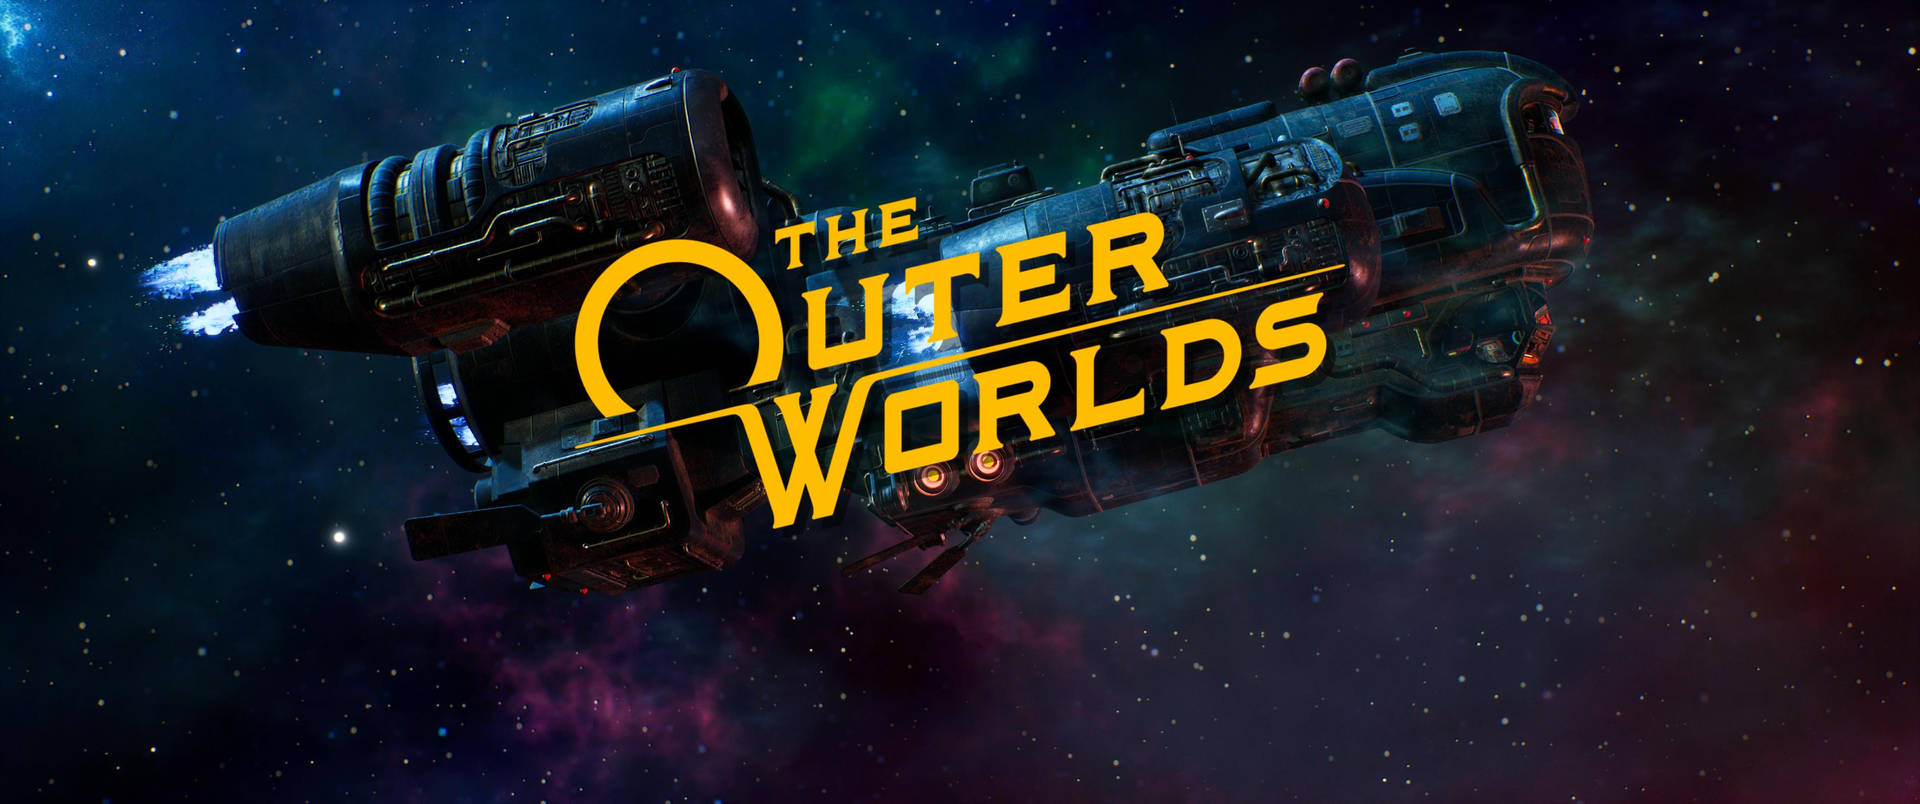 The Outer Worlds Title Screen Background